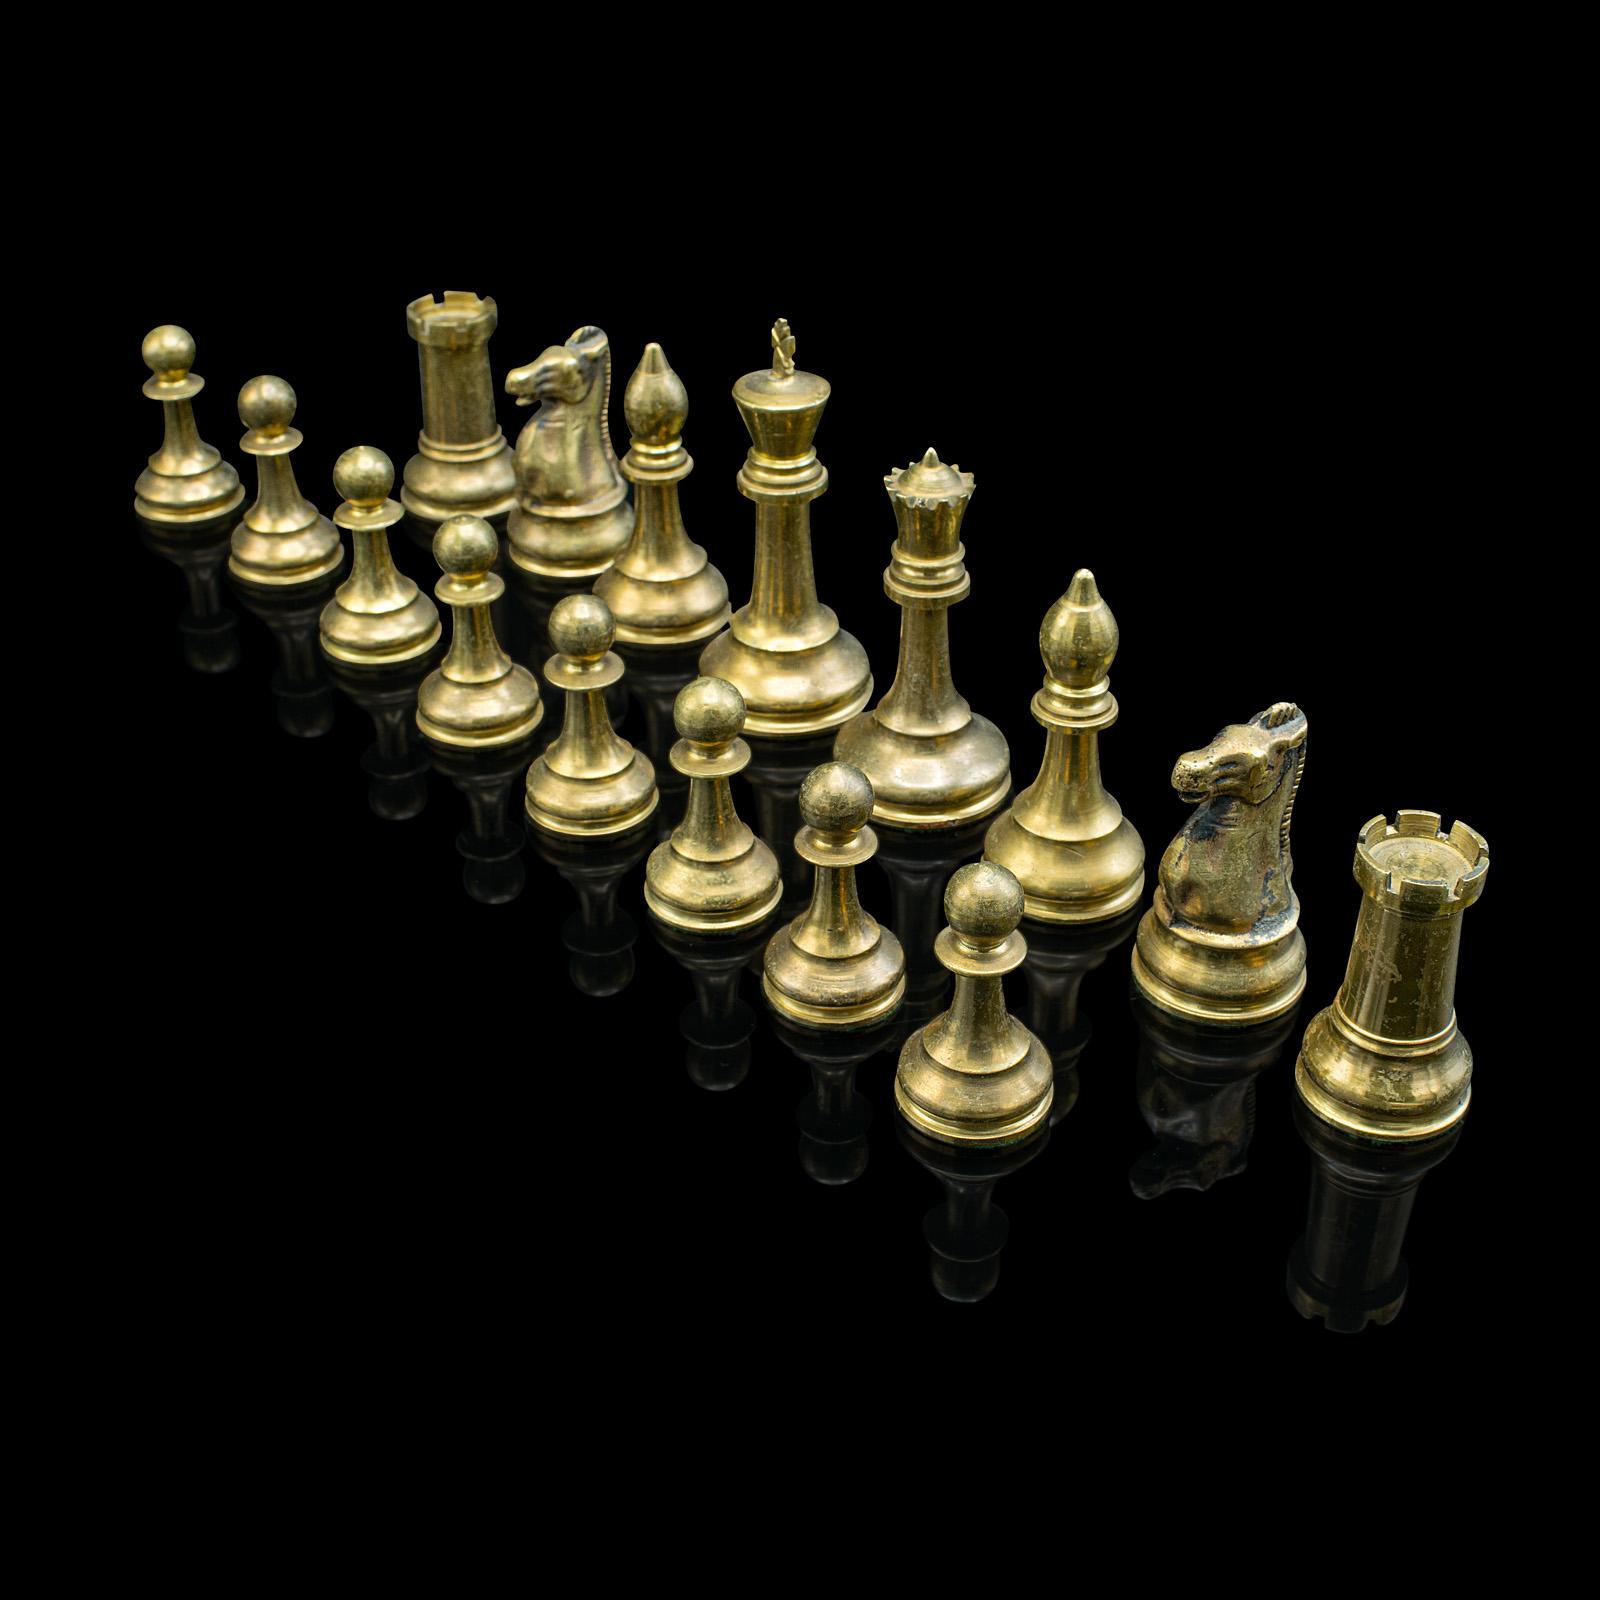 Large Vintage Chess Board, English, Brass, Copper, Gaming Set, Late 20th Century For Sale 4